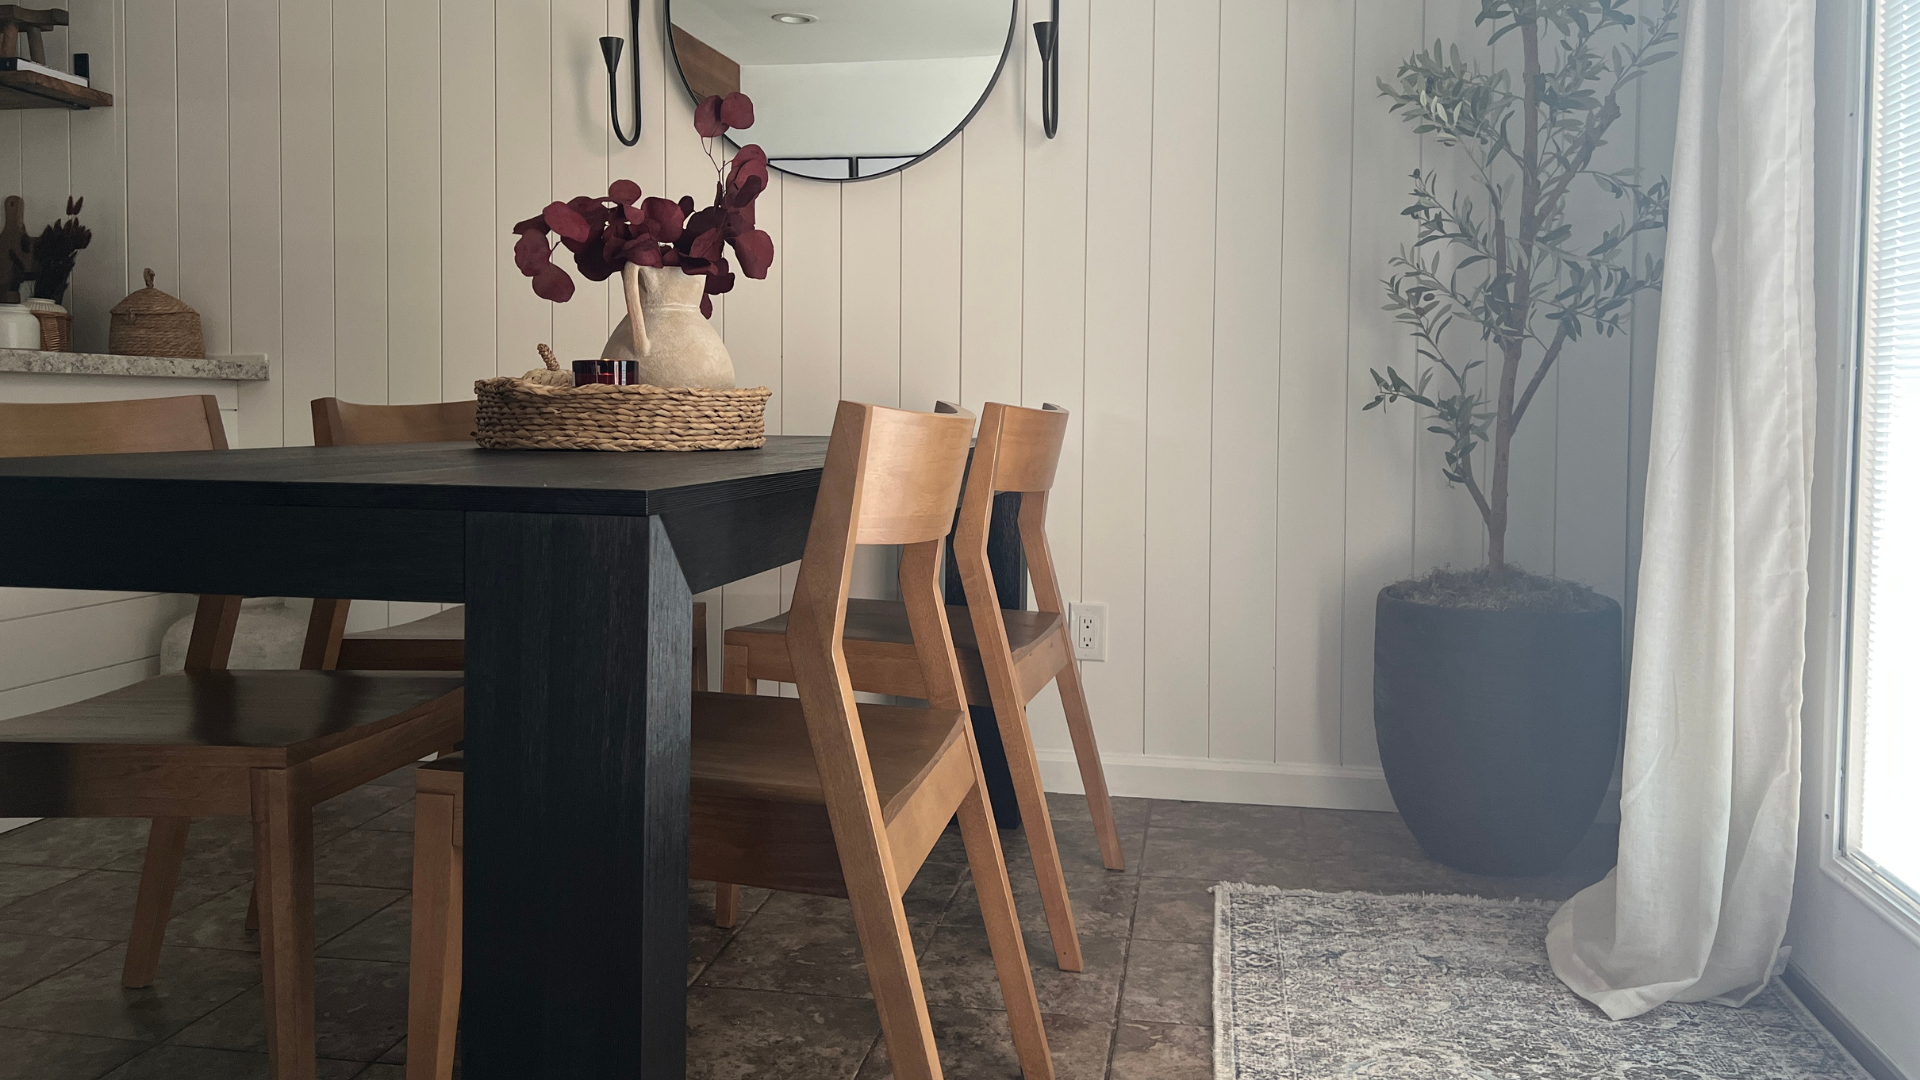 Modern black dining table with solid wood dining chairs in pecan, floral centerpiece, and round mirror